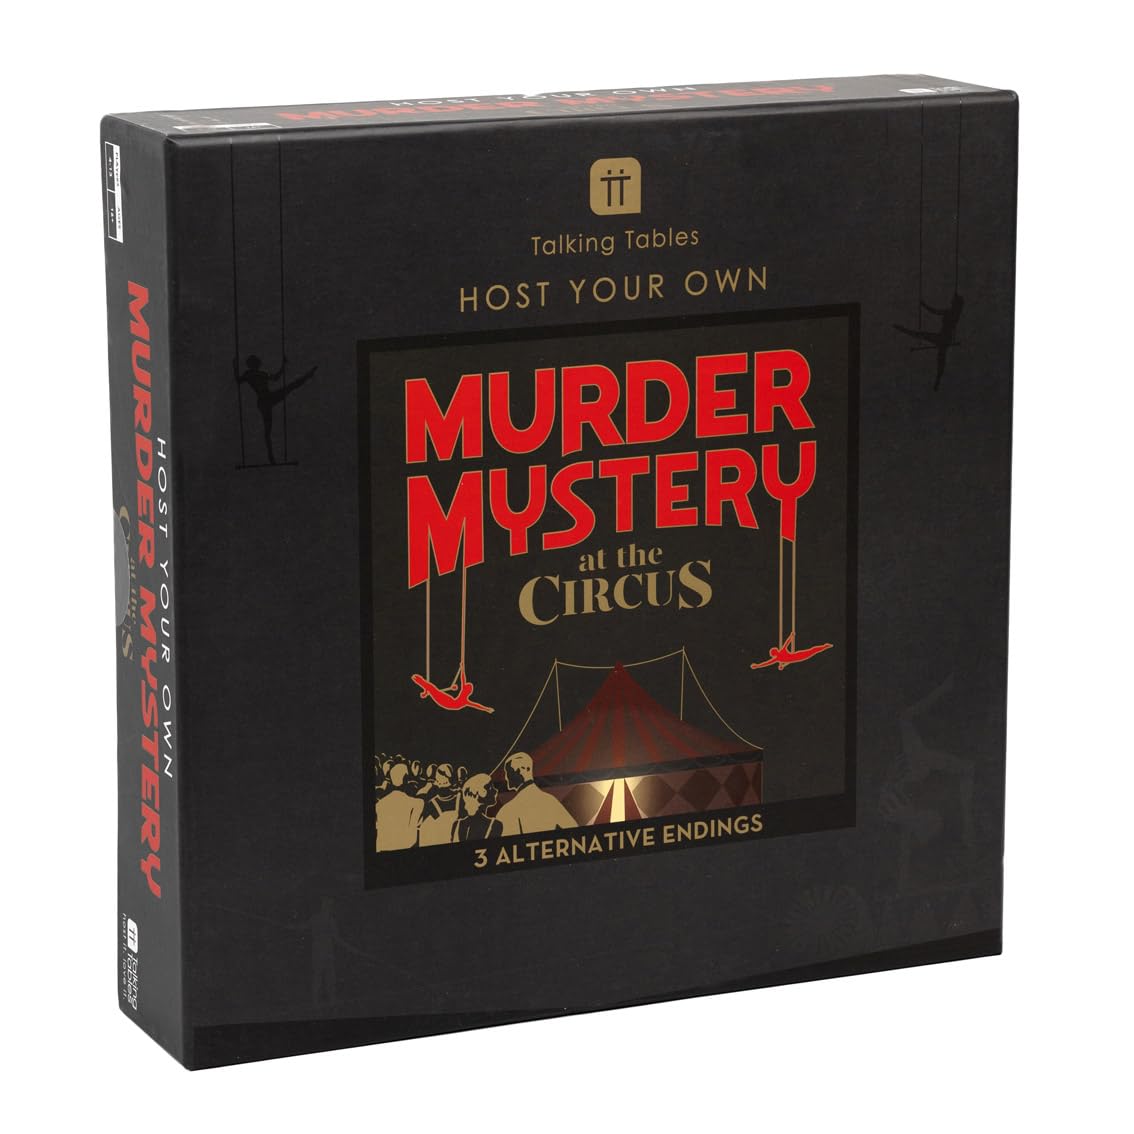 Talking Tables Circus Murder Mystery Game at Home Host Your Own Games Night and Solve The Crime for Dinner Party, Birthday, Entertainment for Adults, Teenagers,